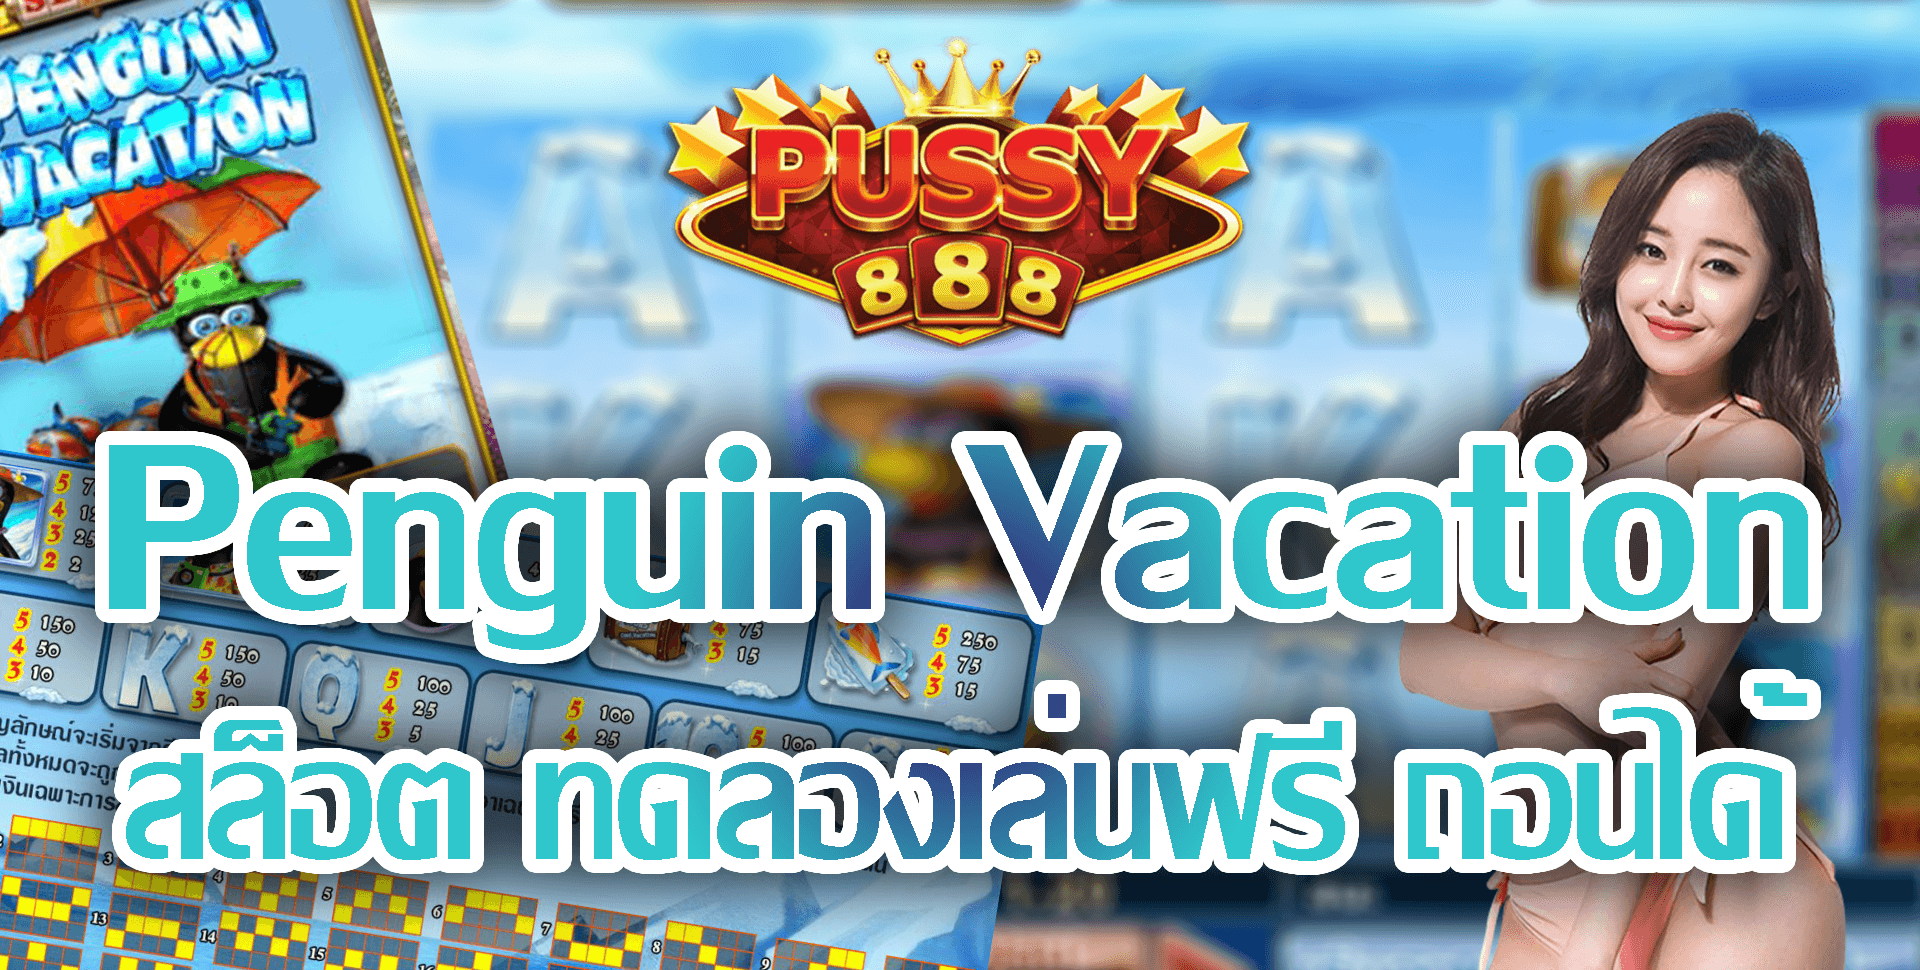 Pussy888-Penguin Vacation-puss888-5